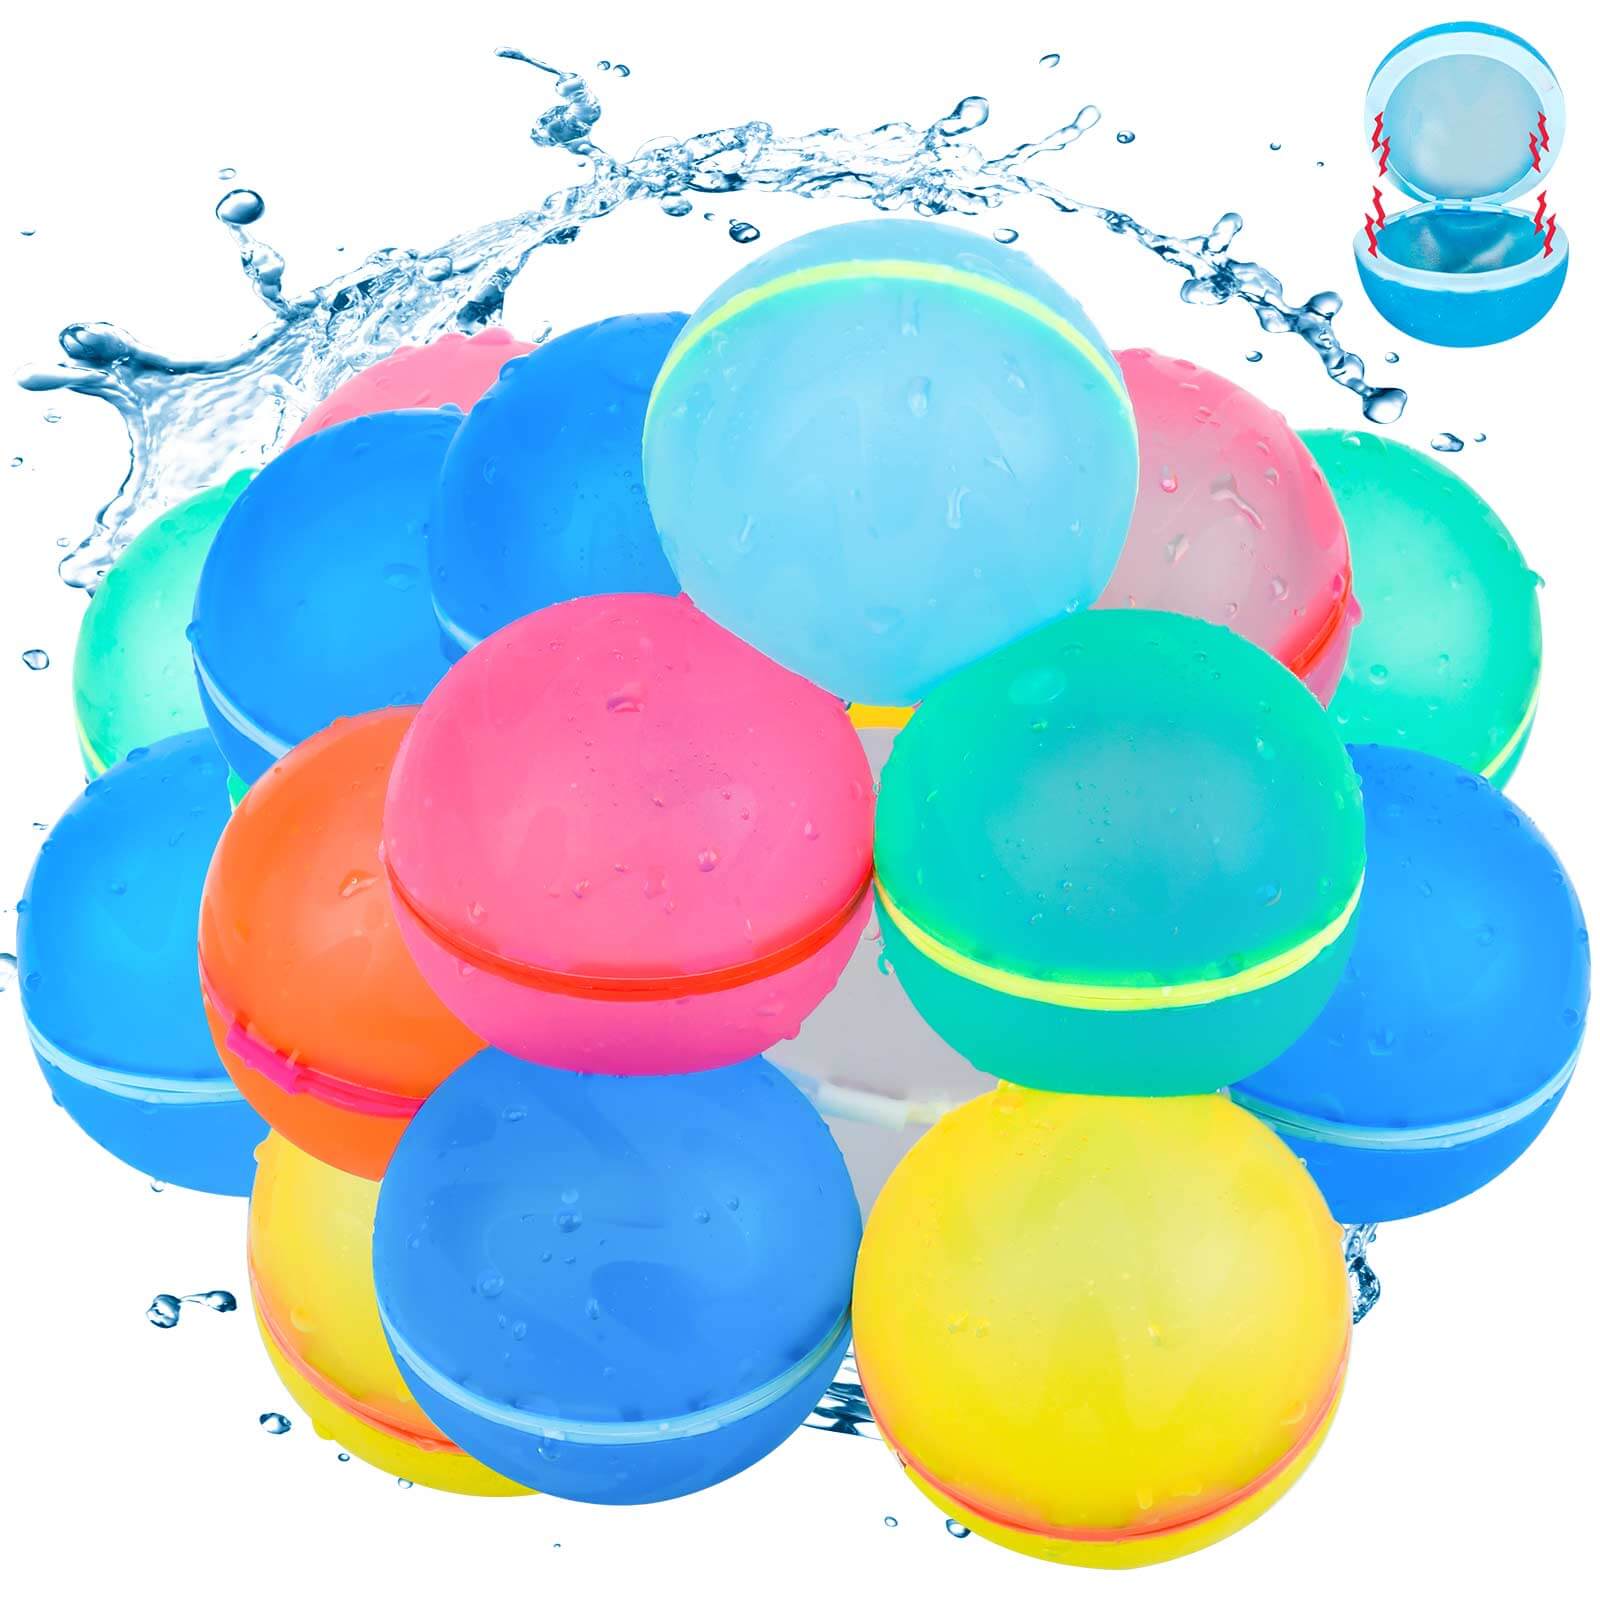 UNEEDE 37 Pcs Pool Toys Set, Reusable Water Balloons and Diving Toys for Kids, Magnetic Water Balloons Quick Fill and Underwater Summer Fun Toys Set